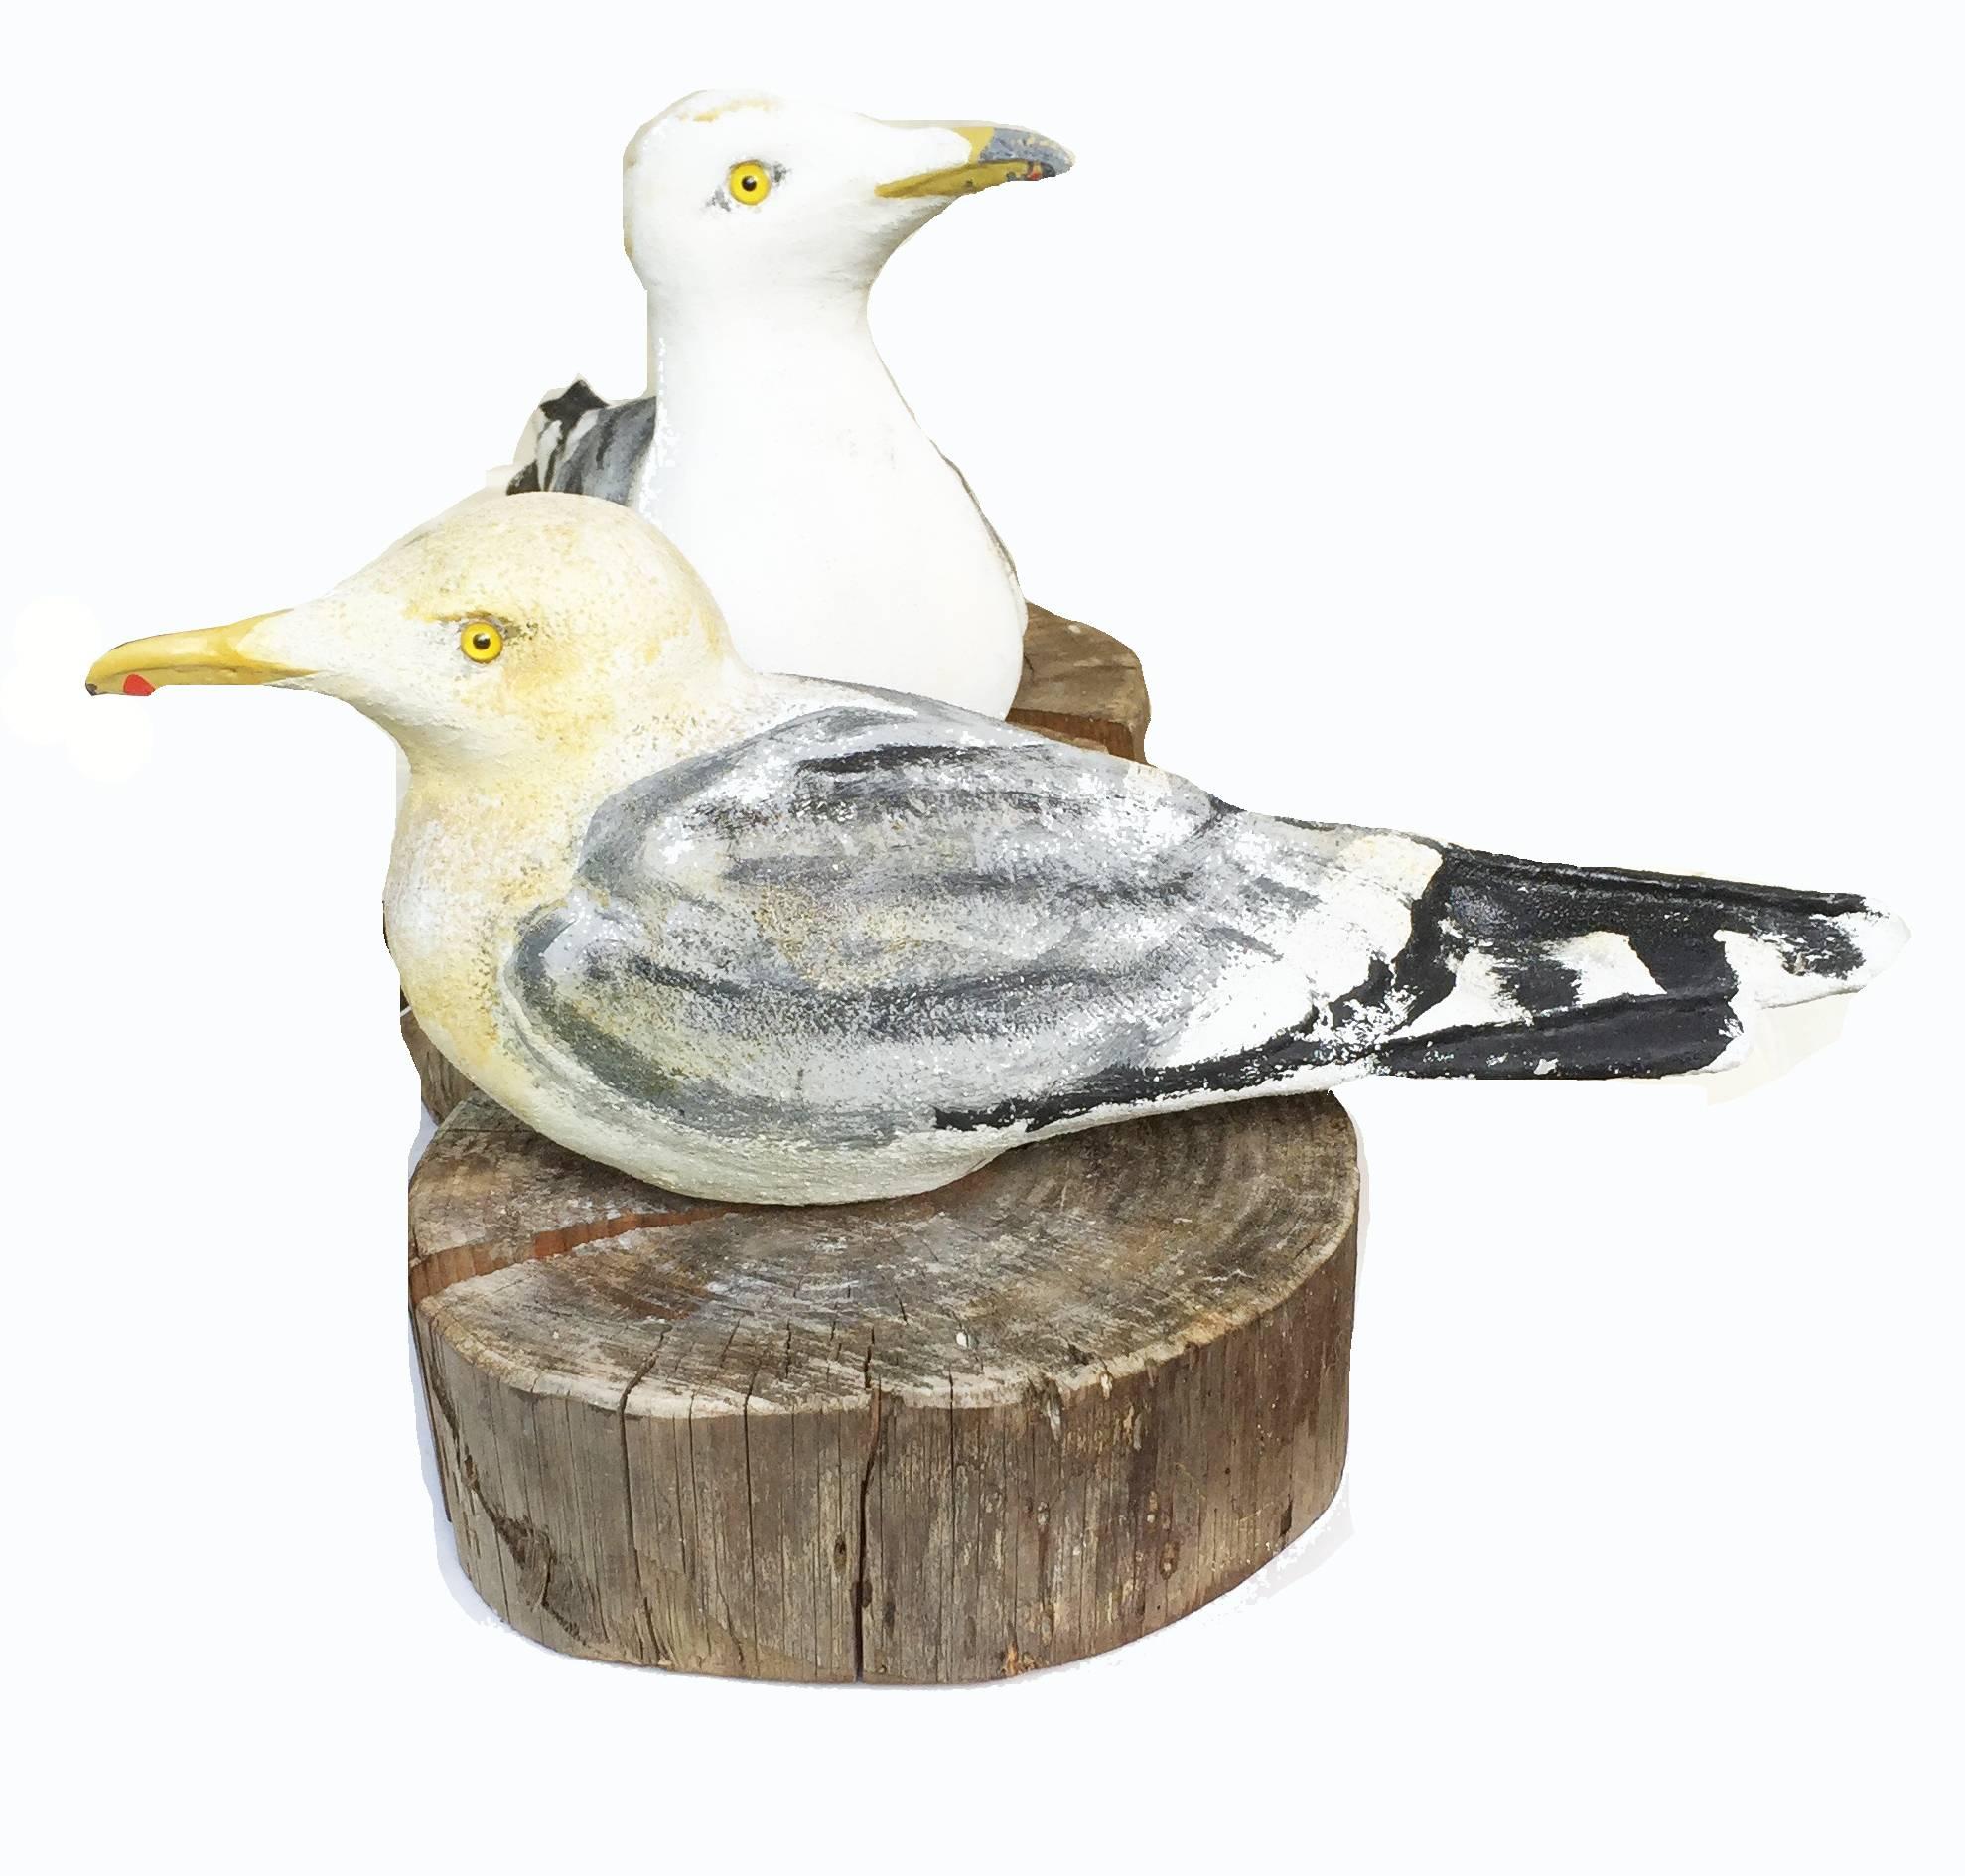 Pair of artist signed painted cement Seagull form doorstops on wood slab stands, the seagulls painted realistically, each with glass-inset yellow eyes, one with raised head and the other with head lowered into body, the wood slabs made of cross-cut